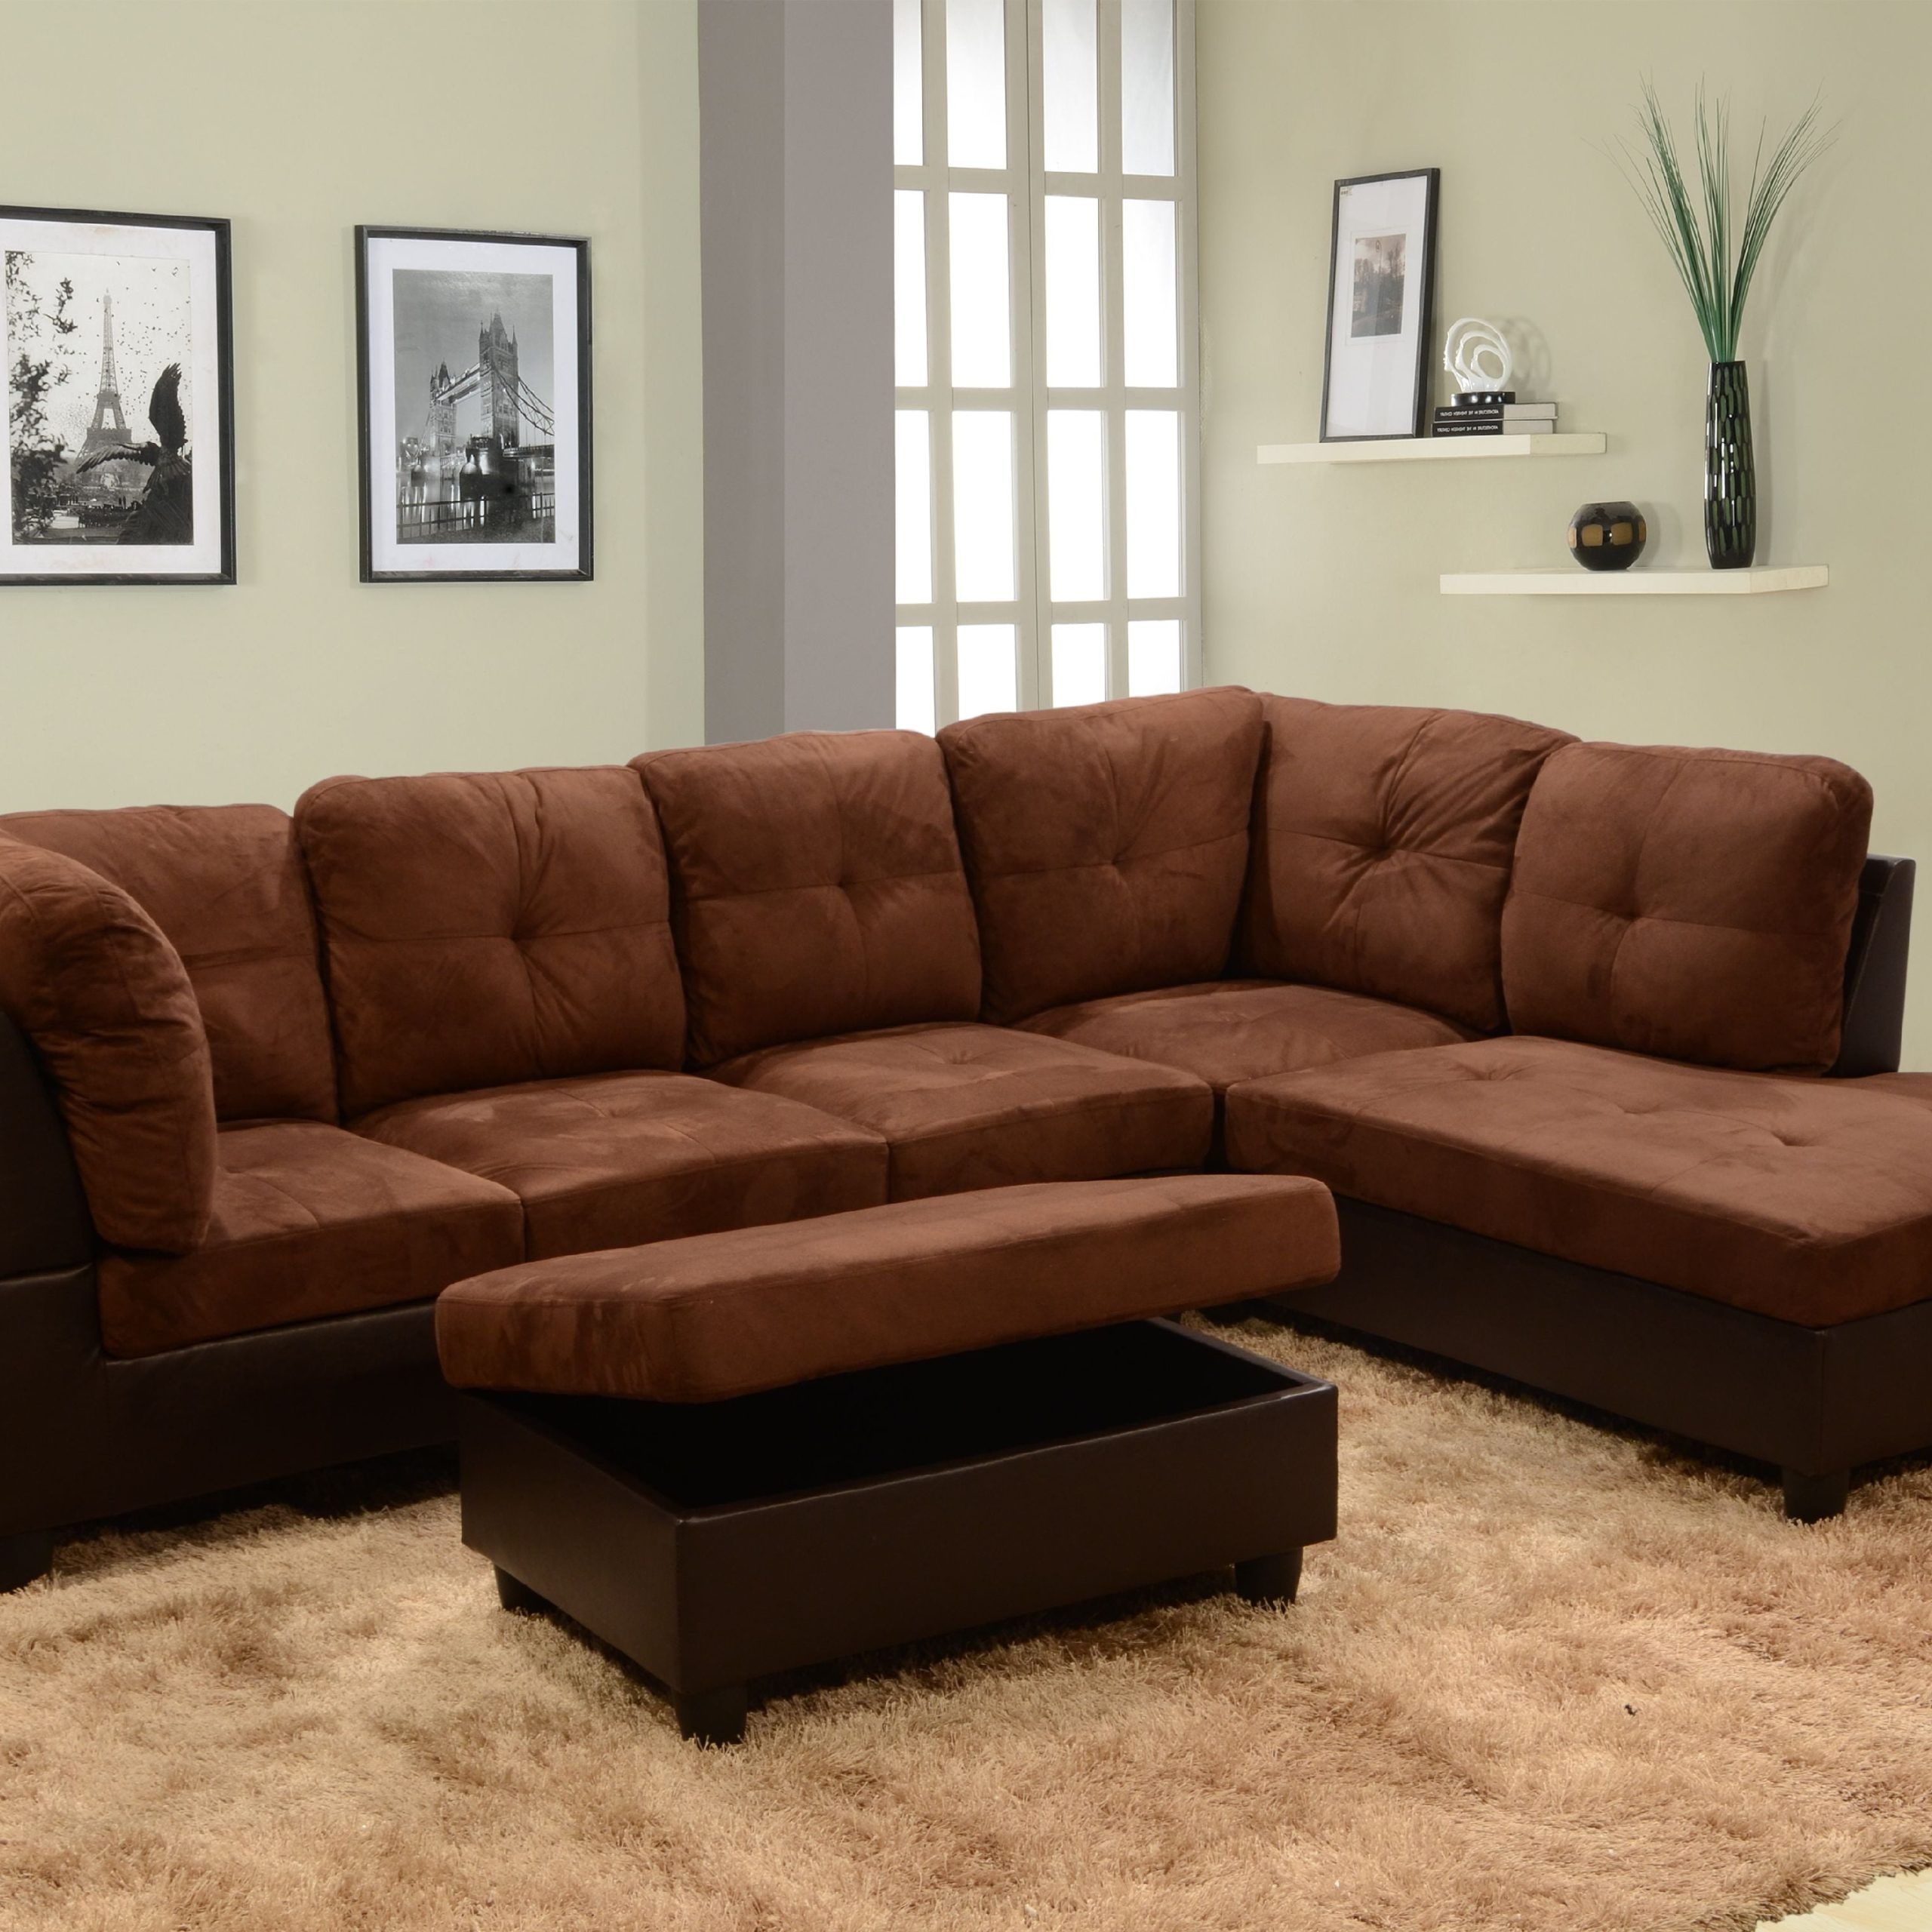 Matt Right Facing Sectional Sofa With Ottoman,chocolate – Walmart Within Sofas With Ottomans (Gallery 3 of 20)